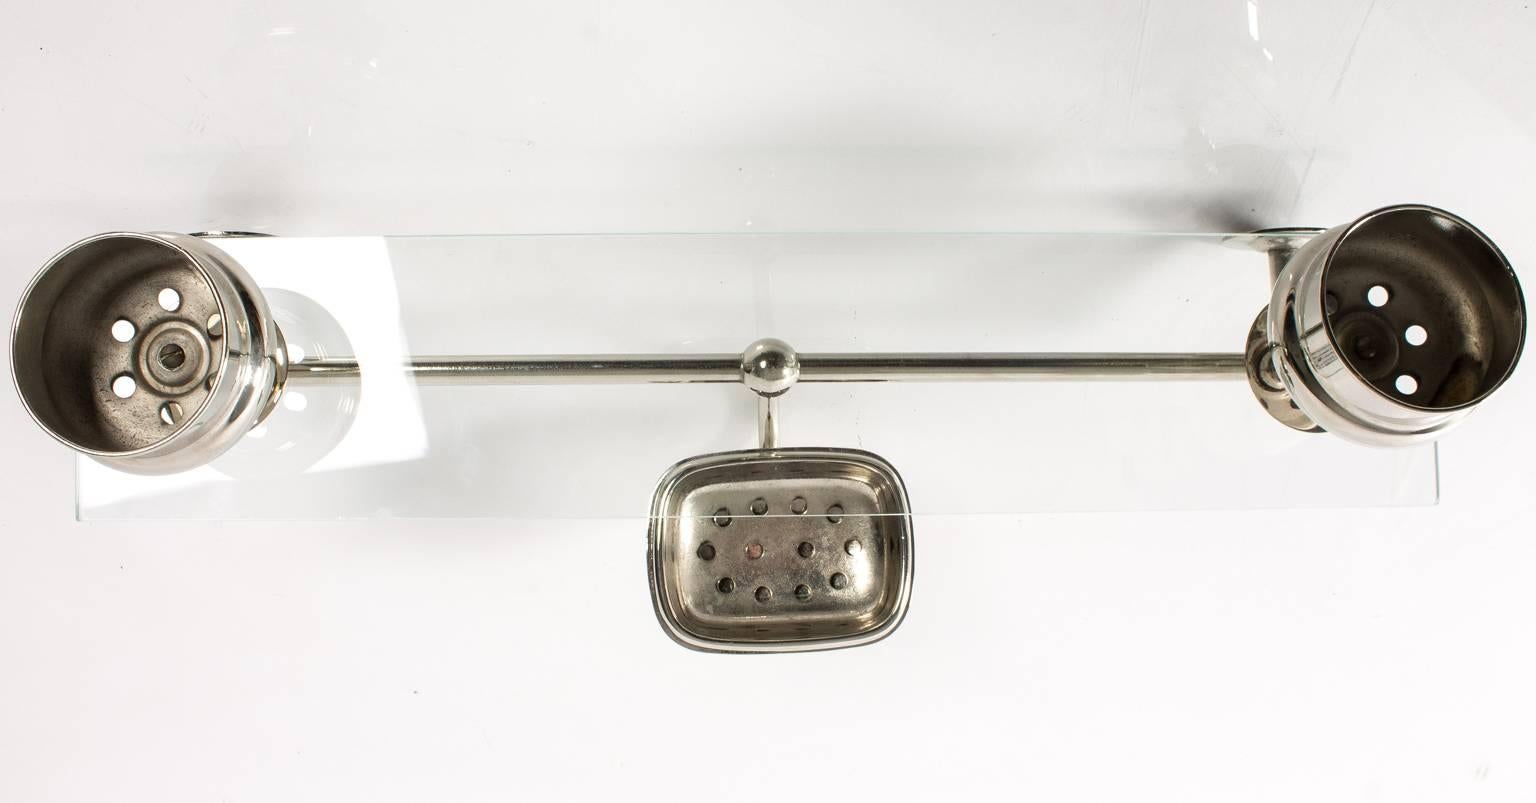 Rare combination bath shelf with soap dish and tooth brush holder attachments.